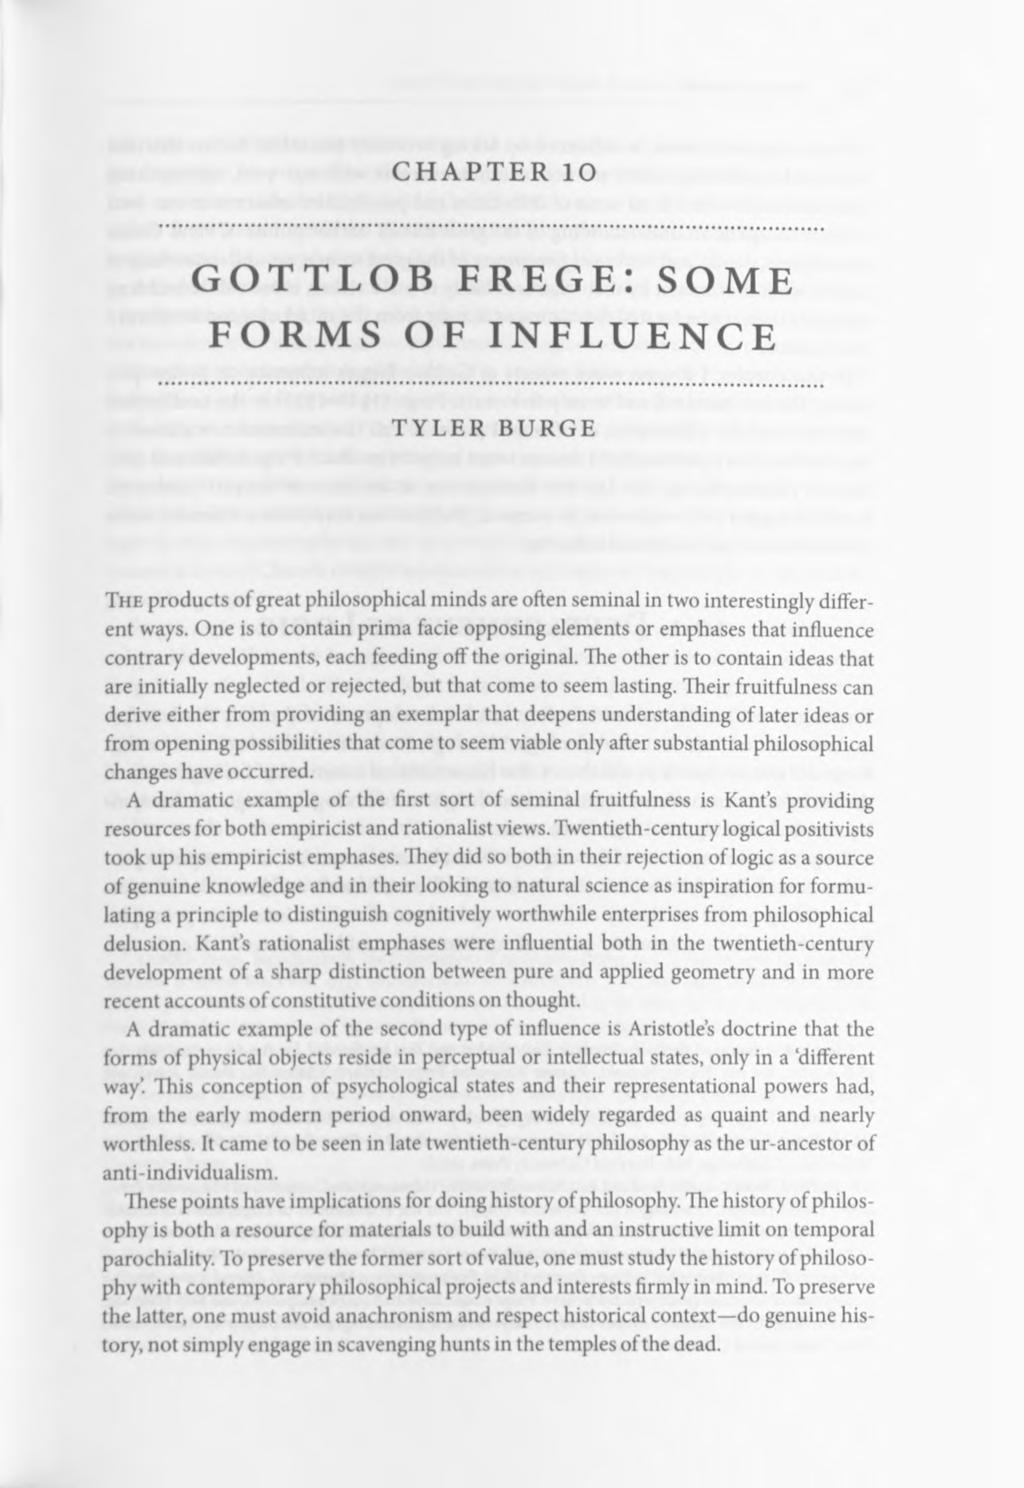 CHAPTER 10 GOTTLOB FREGE: SOME FORMS OF INFLUENCE TYLER BURGE The products of great philosophical minds are often seminal in two interestingly different ways.